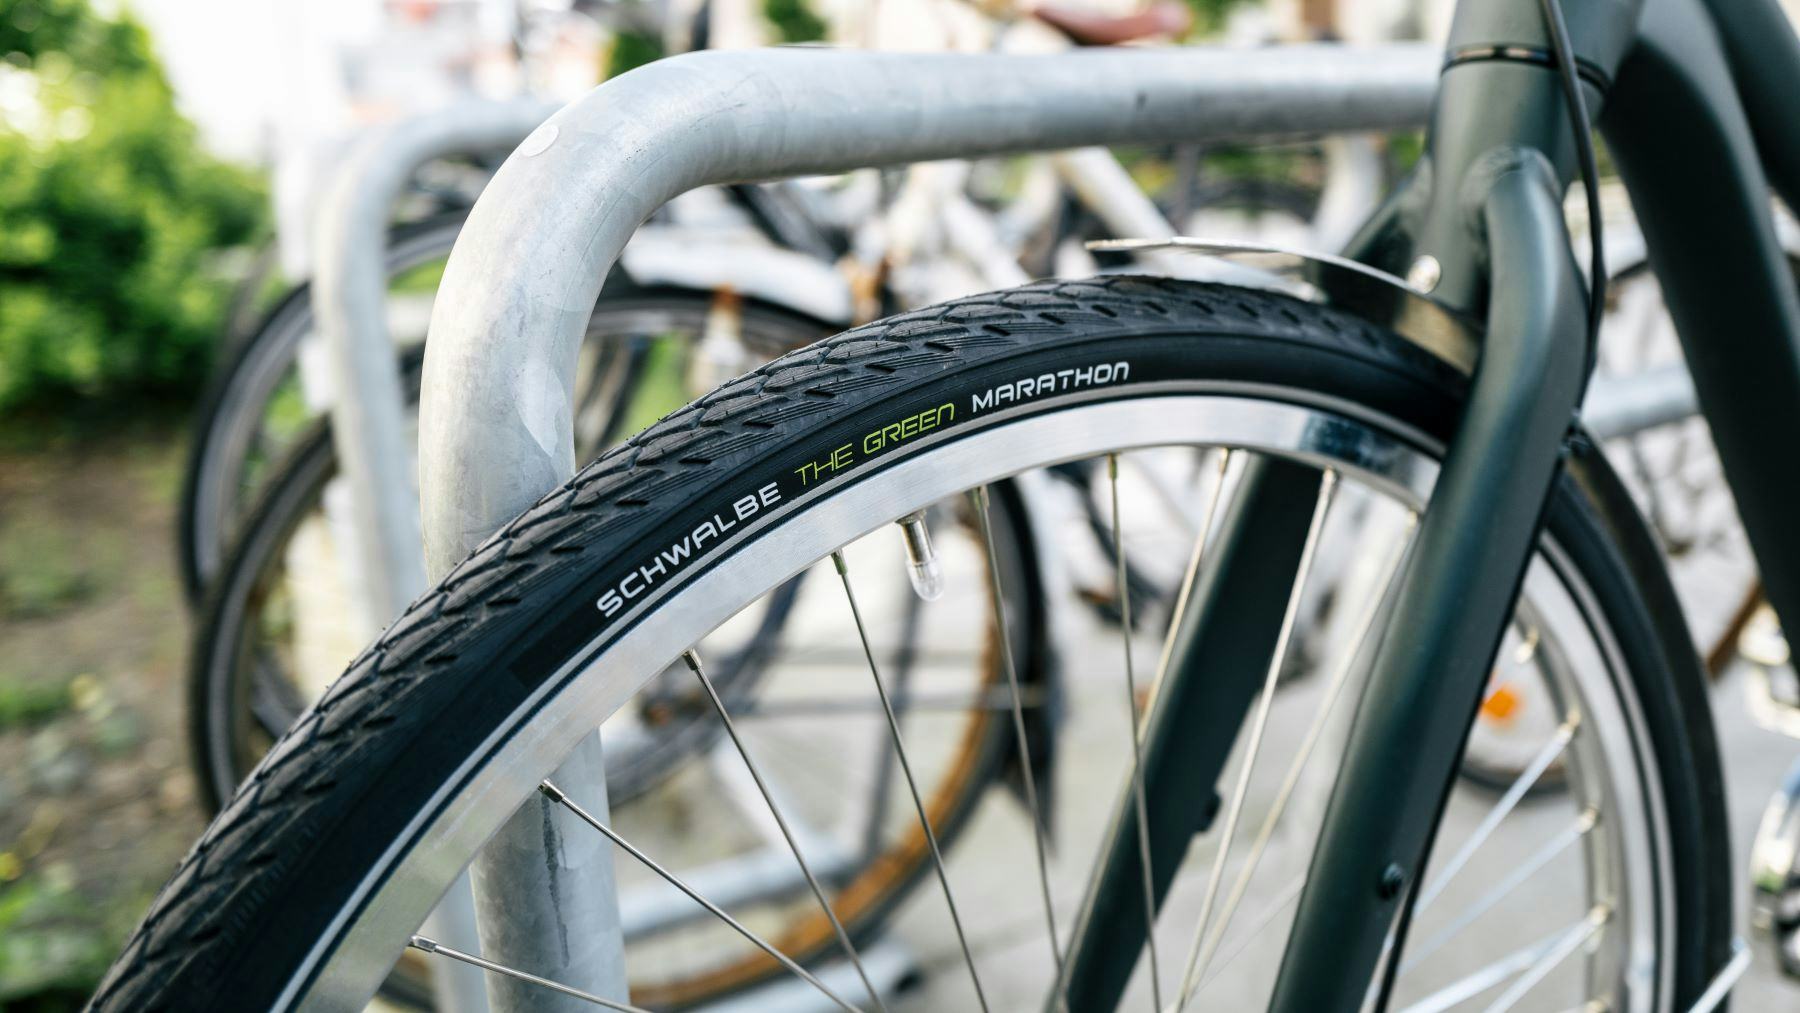 Schwalbe’s Green Marathon tyre was welcomed in 2023 as the company’s most sustainably produced product to date. – Photo Schwalbe